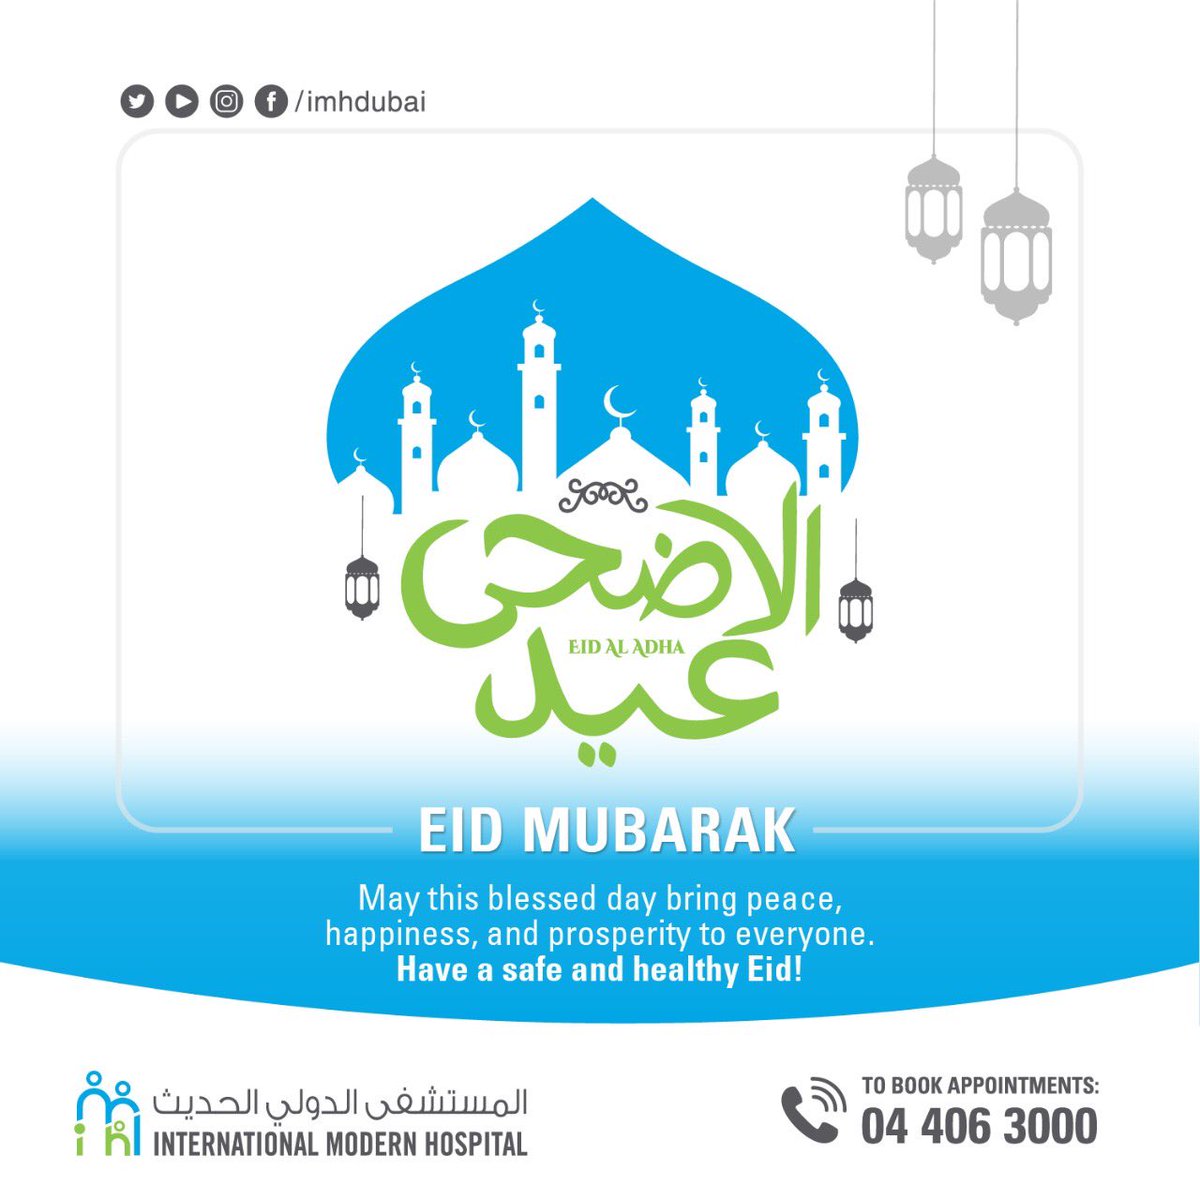 On this joyous occasion of Eid-al-Adha, may Allah fulfill all your wishes and fill your heart with love, your soul with spiritual, your mind with wisdom. Eid Mubarak to you and your loved ones! #imh #imhdubai #itsmyhospital #eid #eidmubarak #eidaladha2022 #eid2022